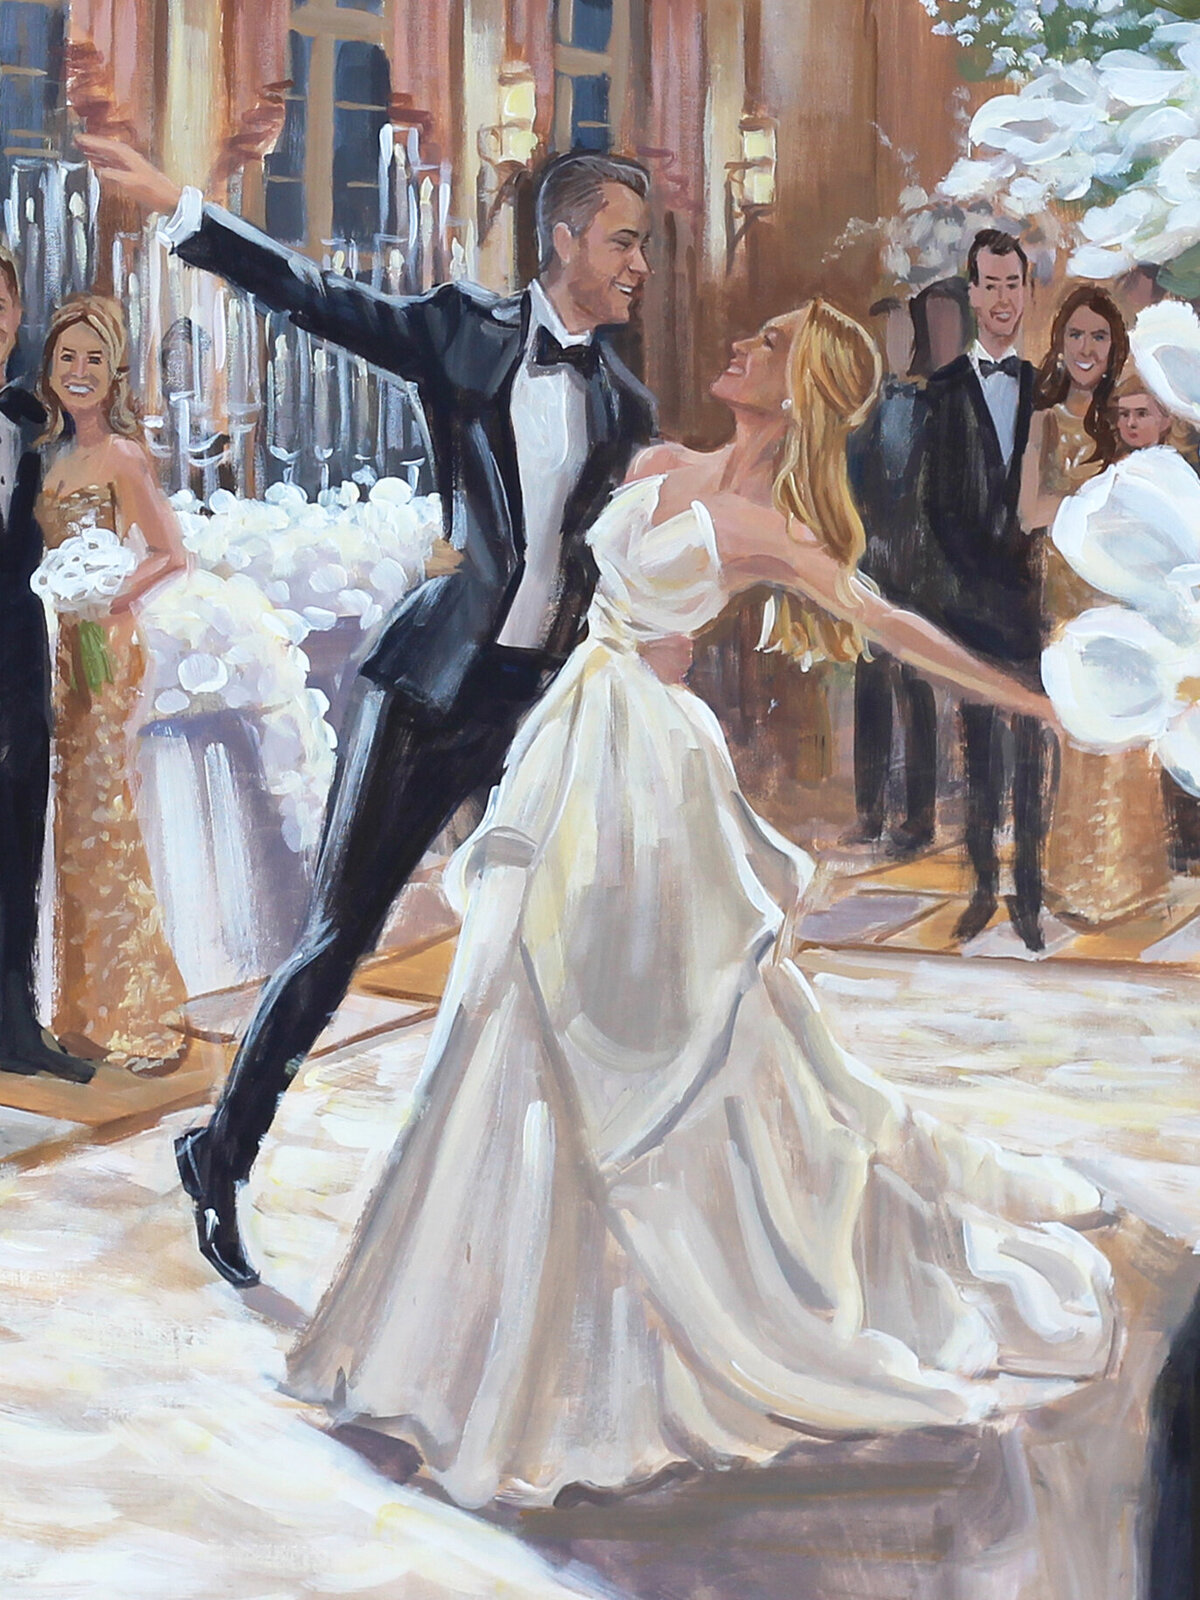 Live Wedding Painter Florida, Ben Keys Fine Art Studio creates painting of bride and groom at The Breakers in Palm Beach, Florida of first dance in the Mediterranean ballroom